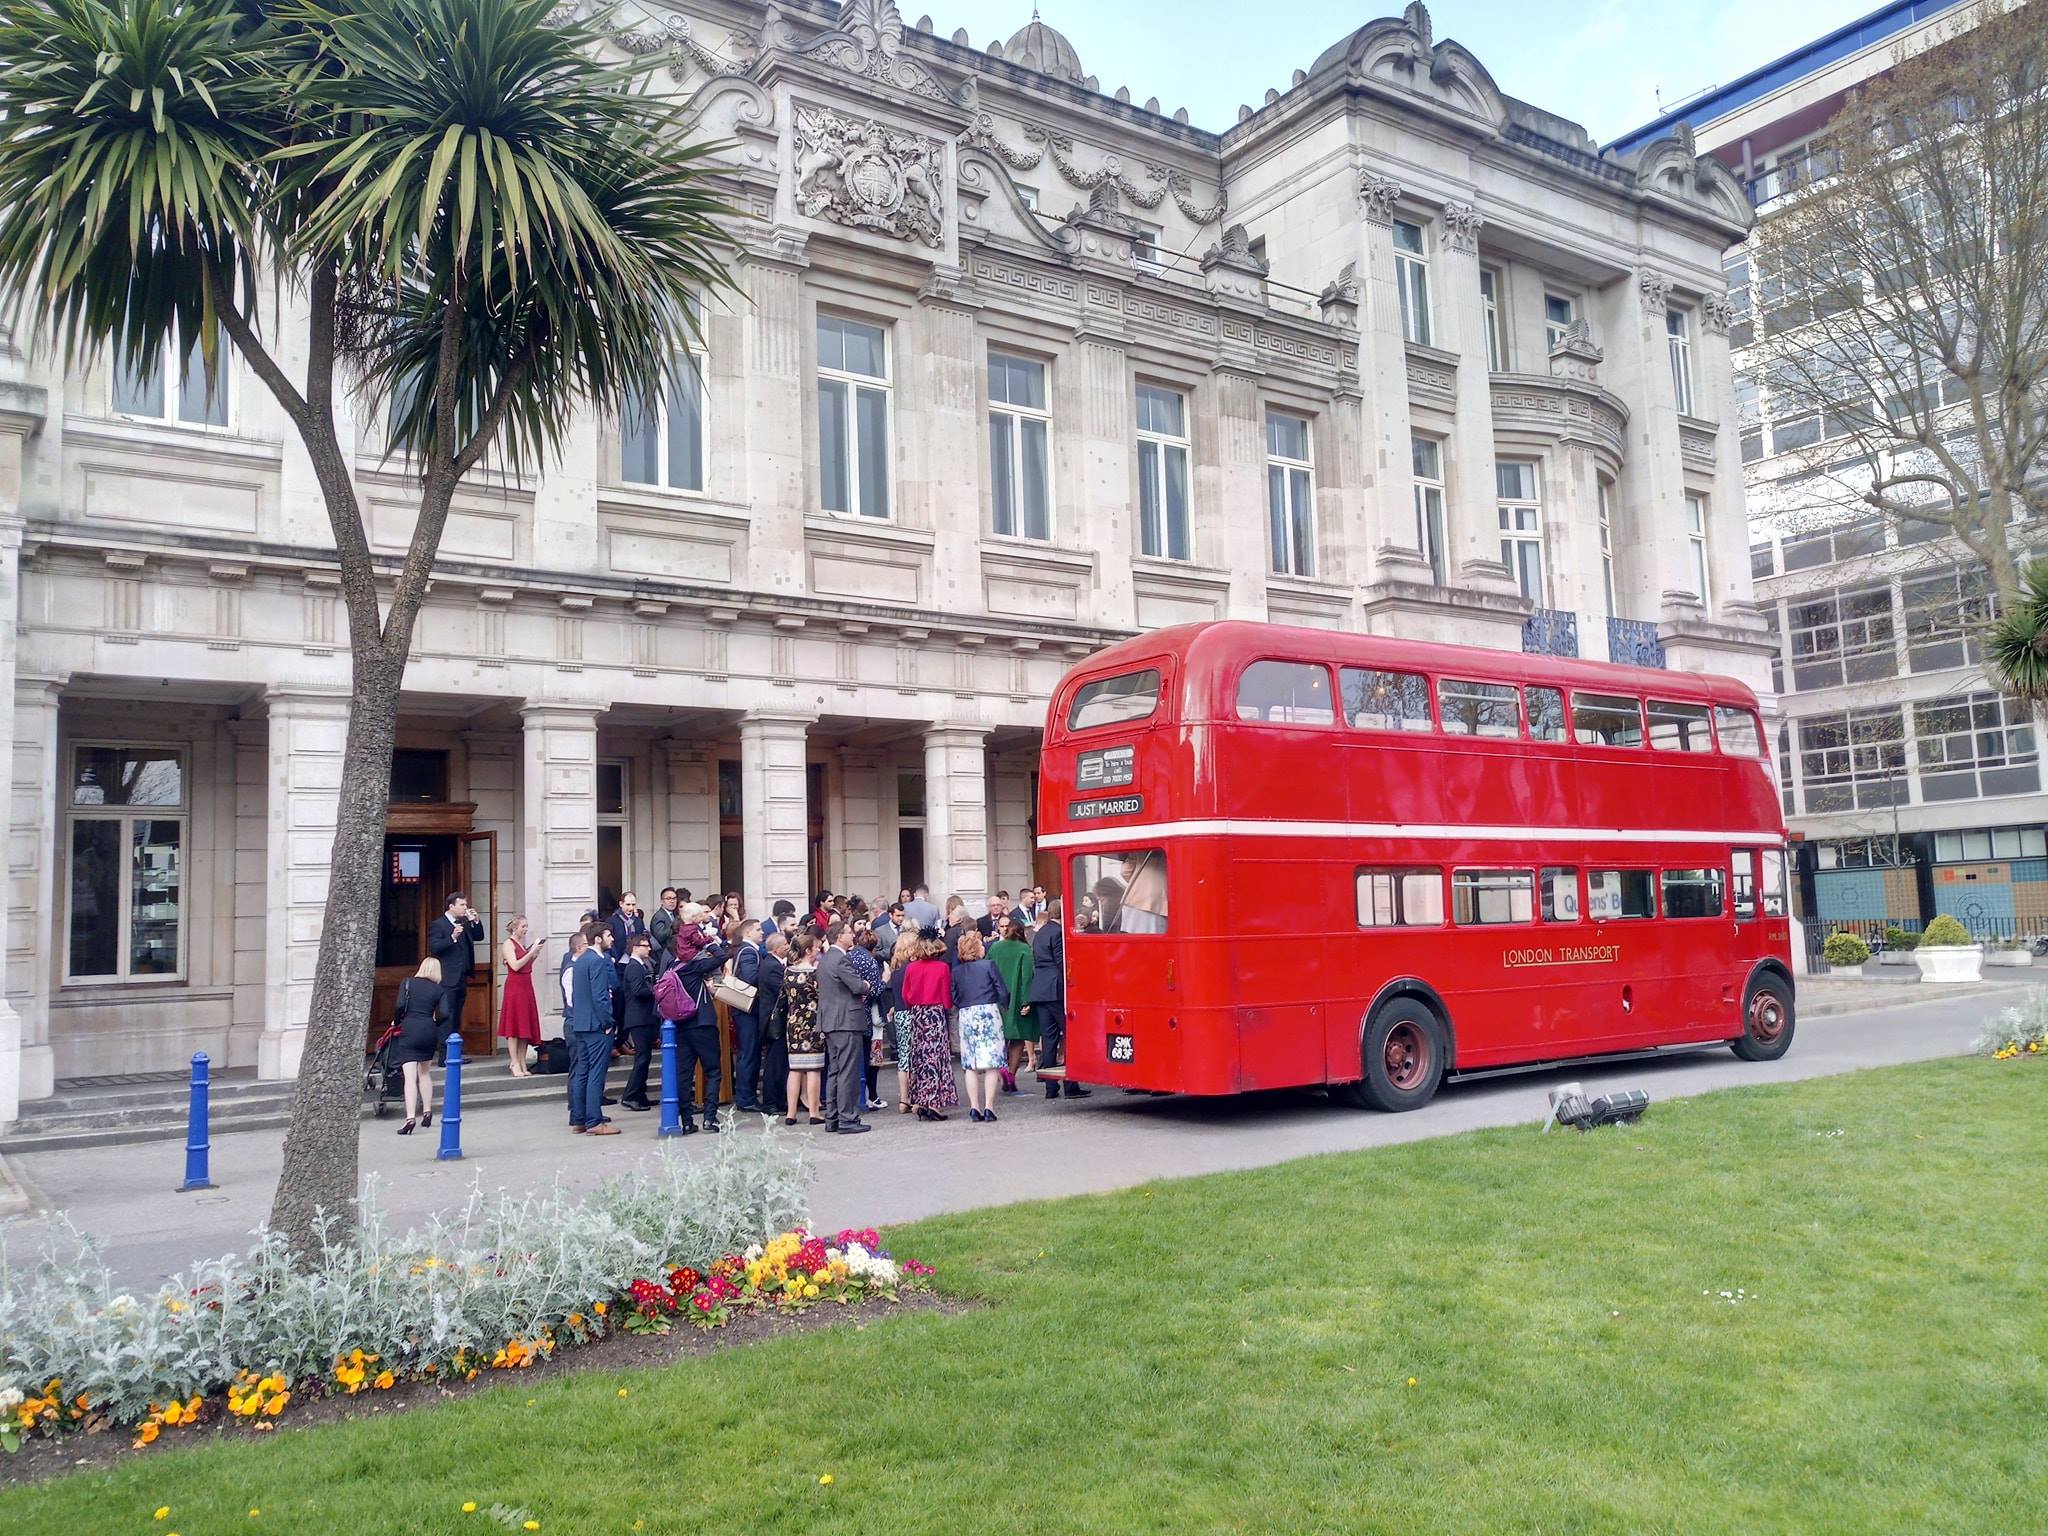 Routemaster bus outside of a wedding venue ready to receive the married couple